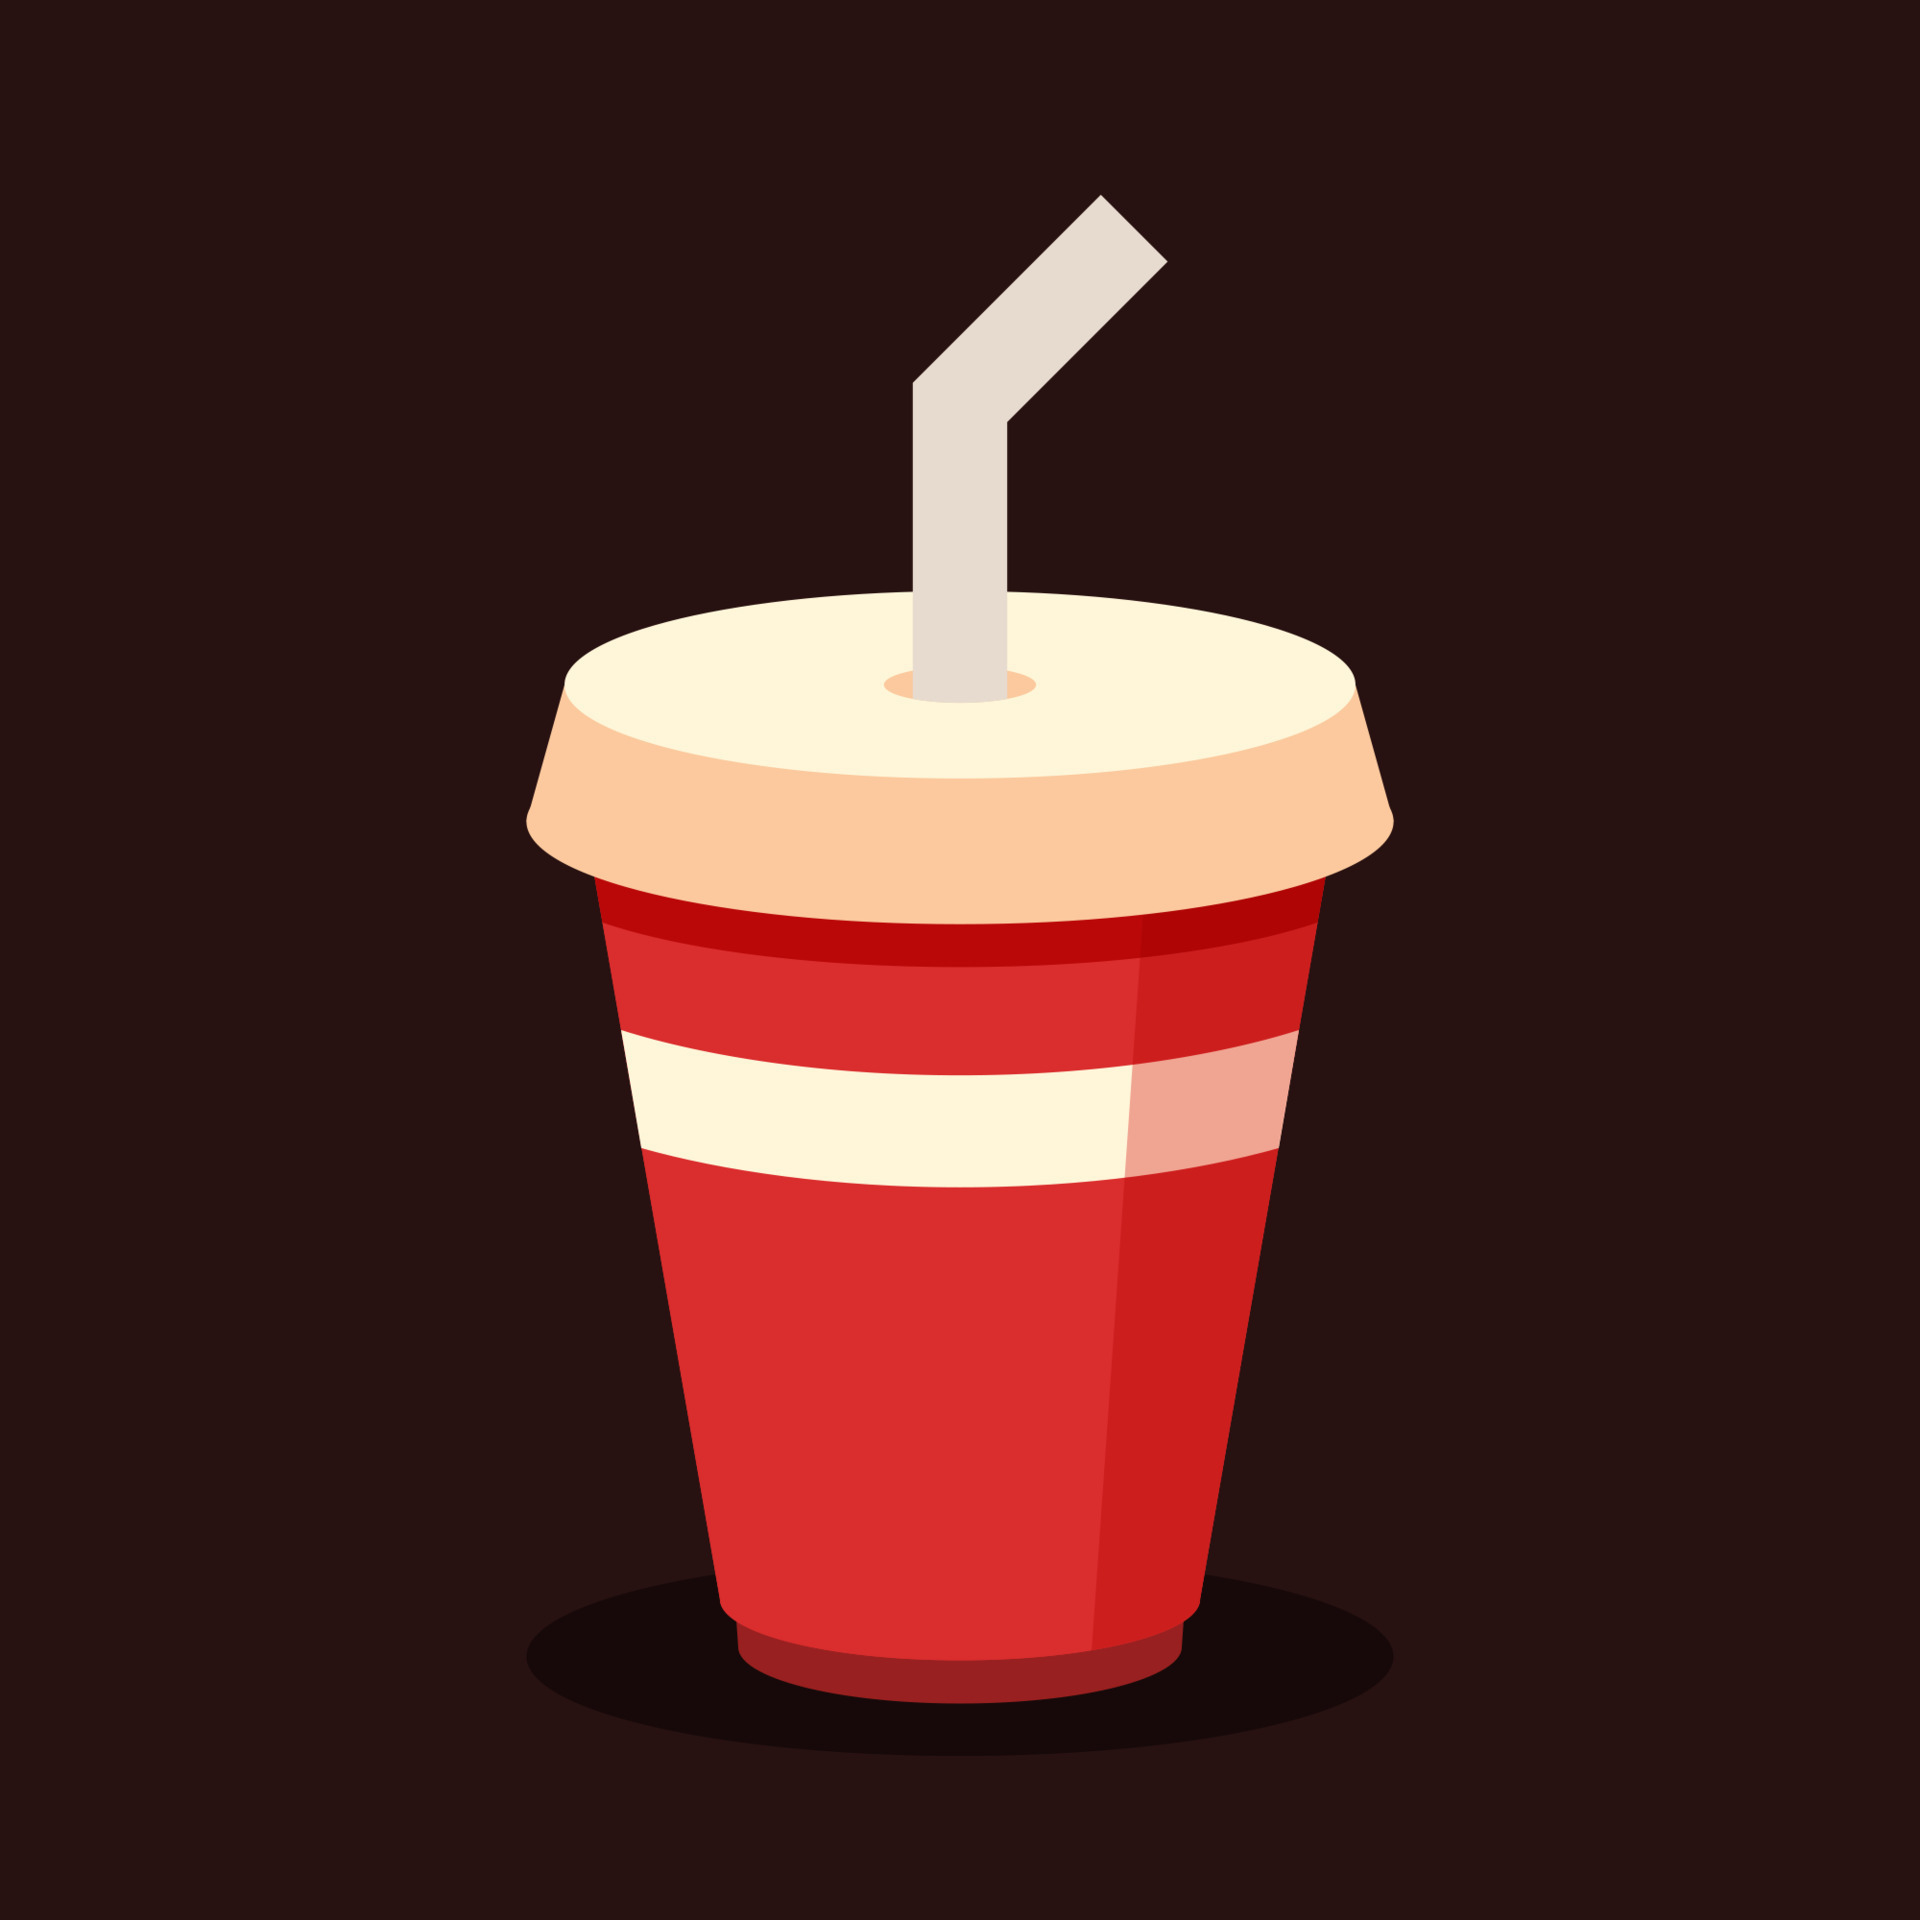 Soda paper cup cartoon icon vector. Disposable paper cup with soda